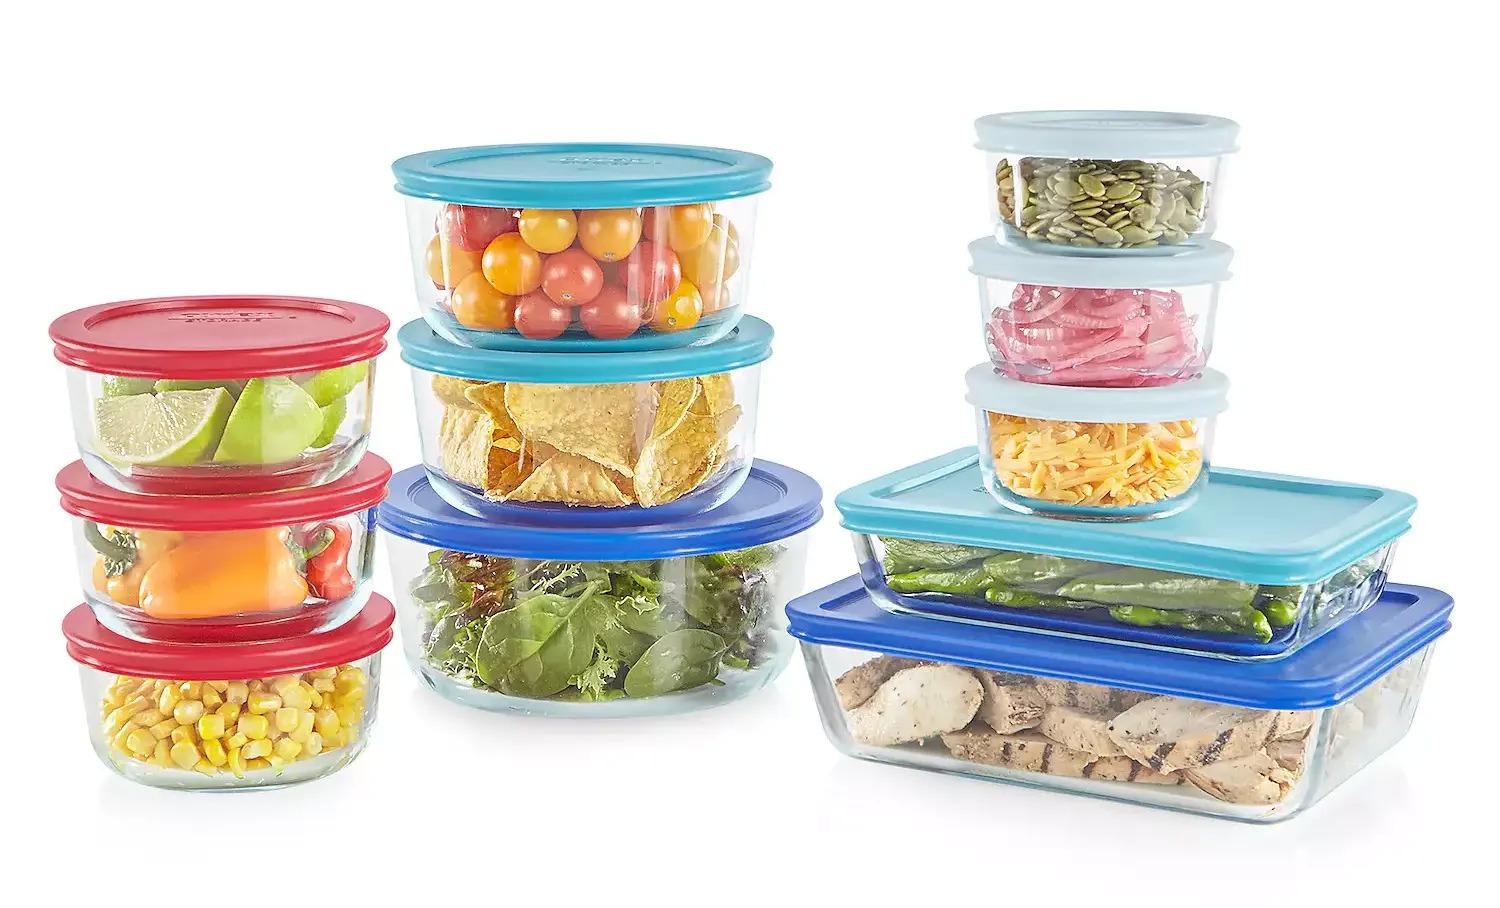 Pyrex 22-piece Glass Food Storage Set for $25.49 Shipped